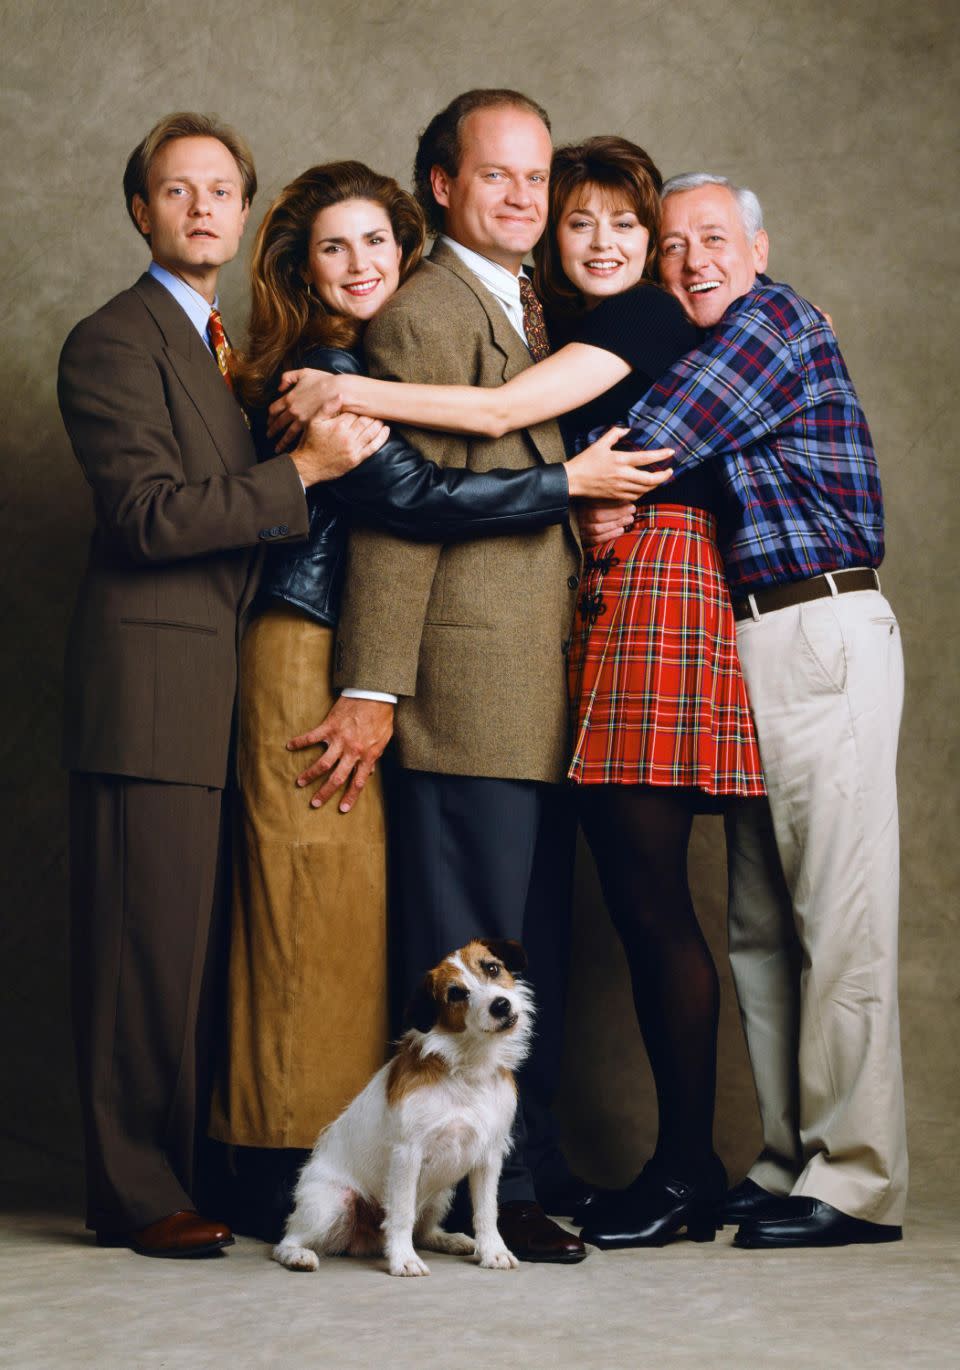 Lisa was originally cast in Frasier as Roz Doyle only to be replaced by Peri Gilpin (second from left) after the pilot episode. Source: Getty